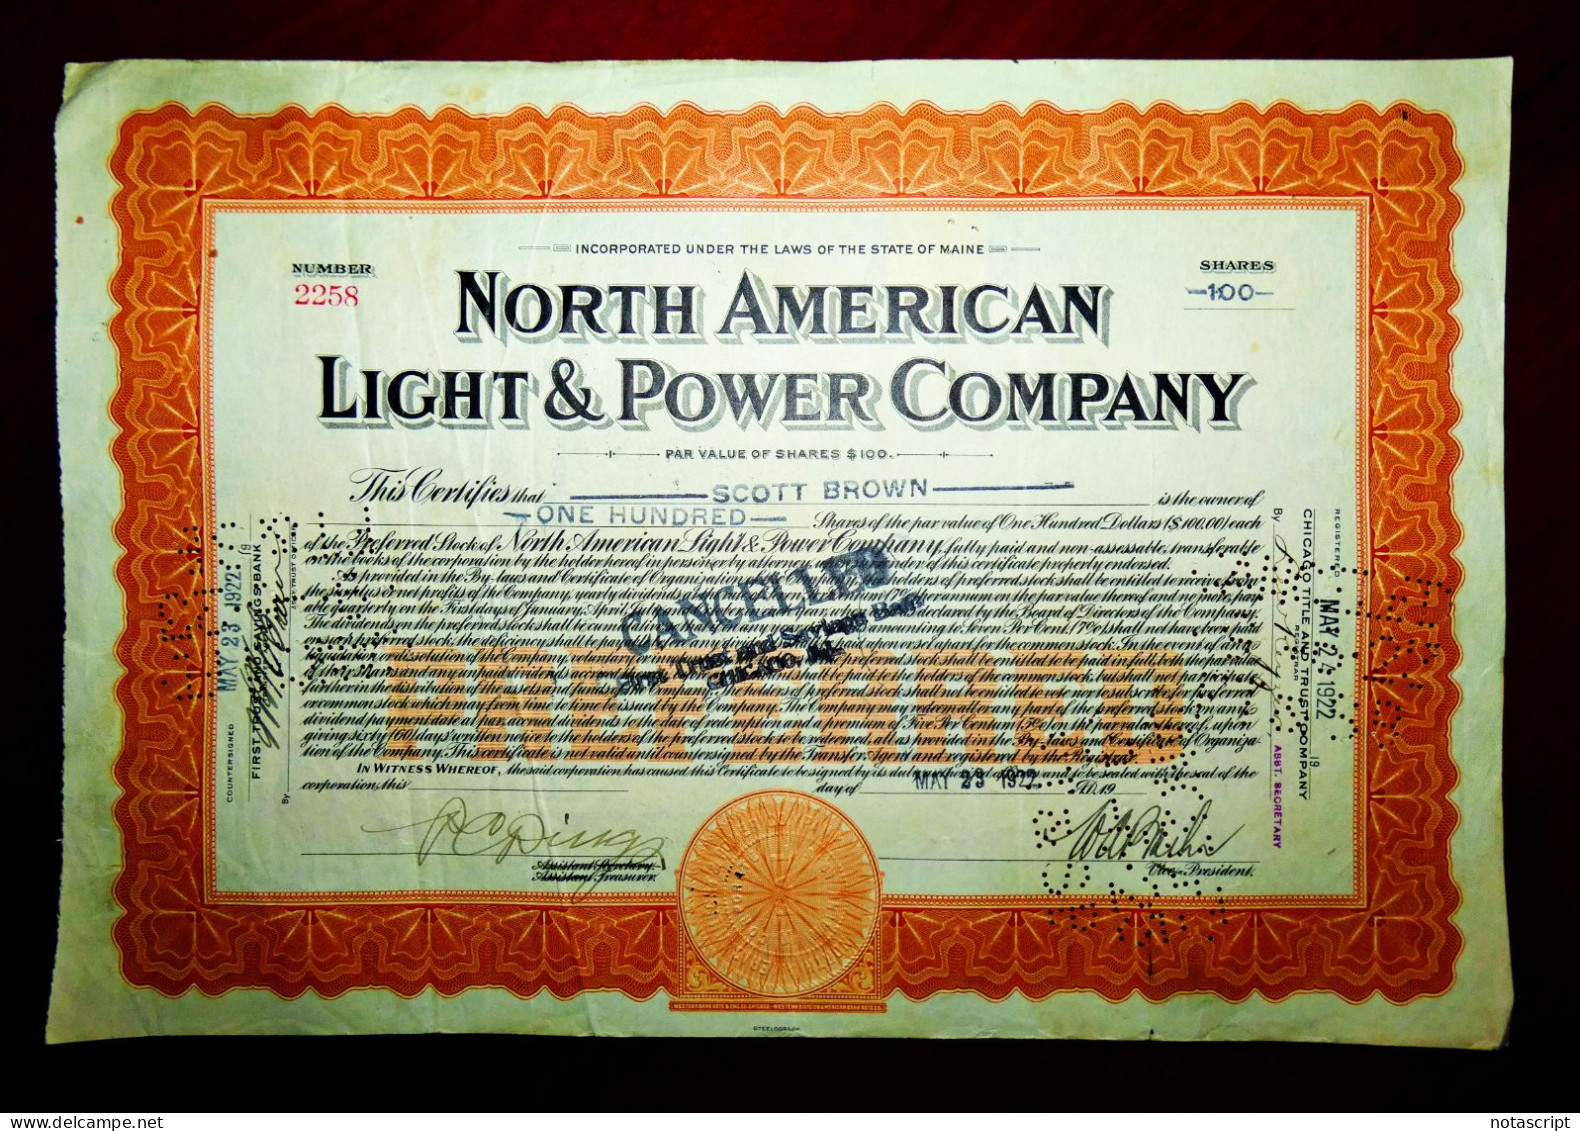 NORTH AMERICAN LIGHT & POWER COMPANY,Maine (US) 1921-23 Share Certificate,cancelled - Electricity & Gas